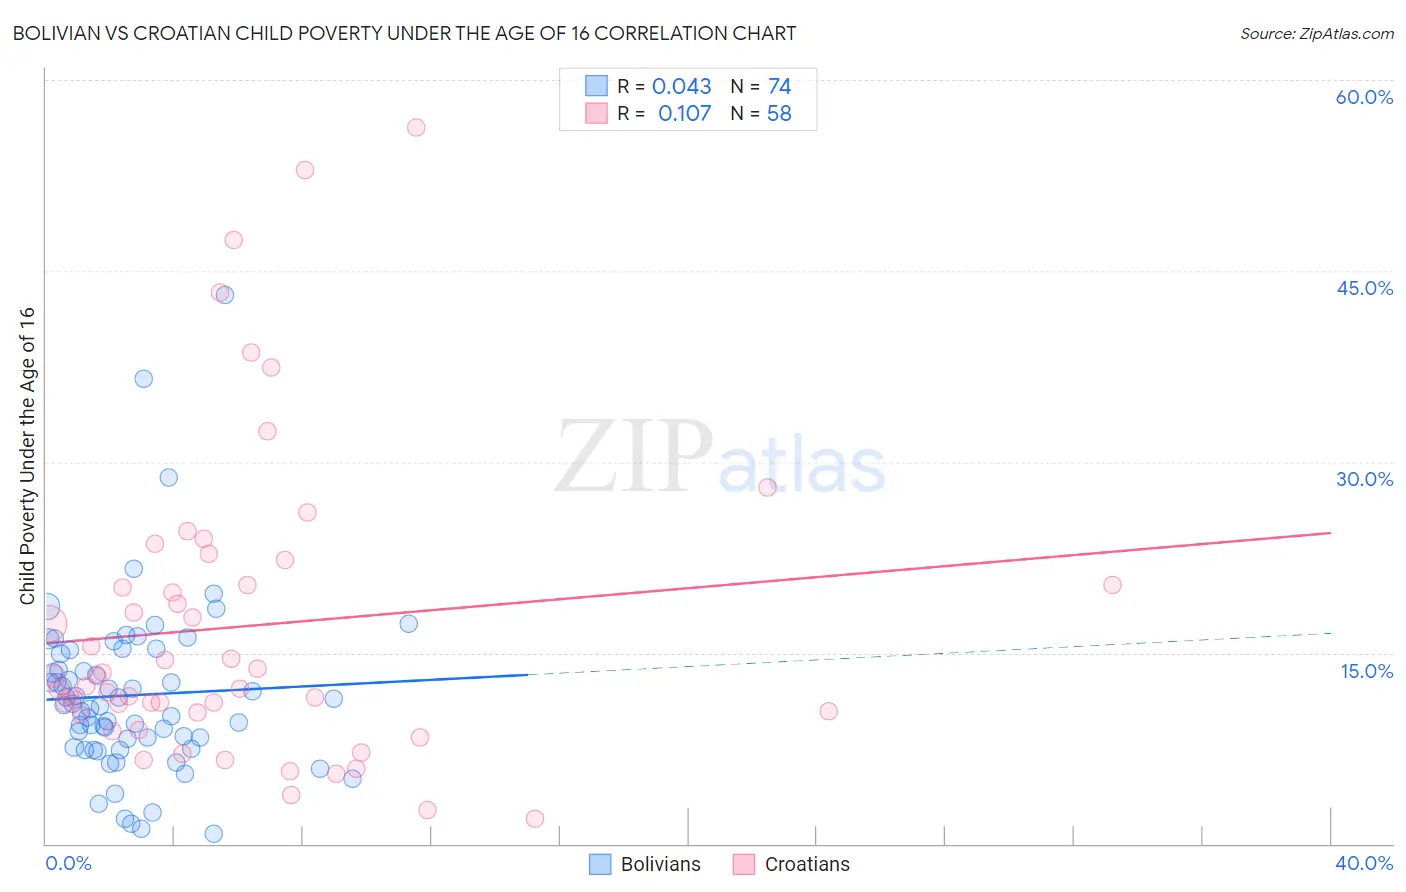 Bolivian vs Croatian Child Poverty Under the Age of 16